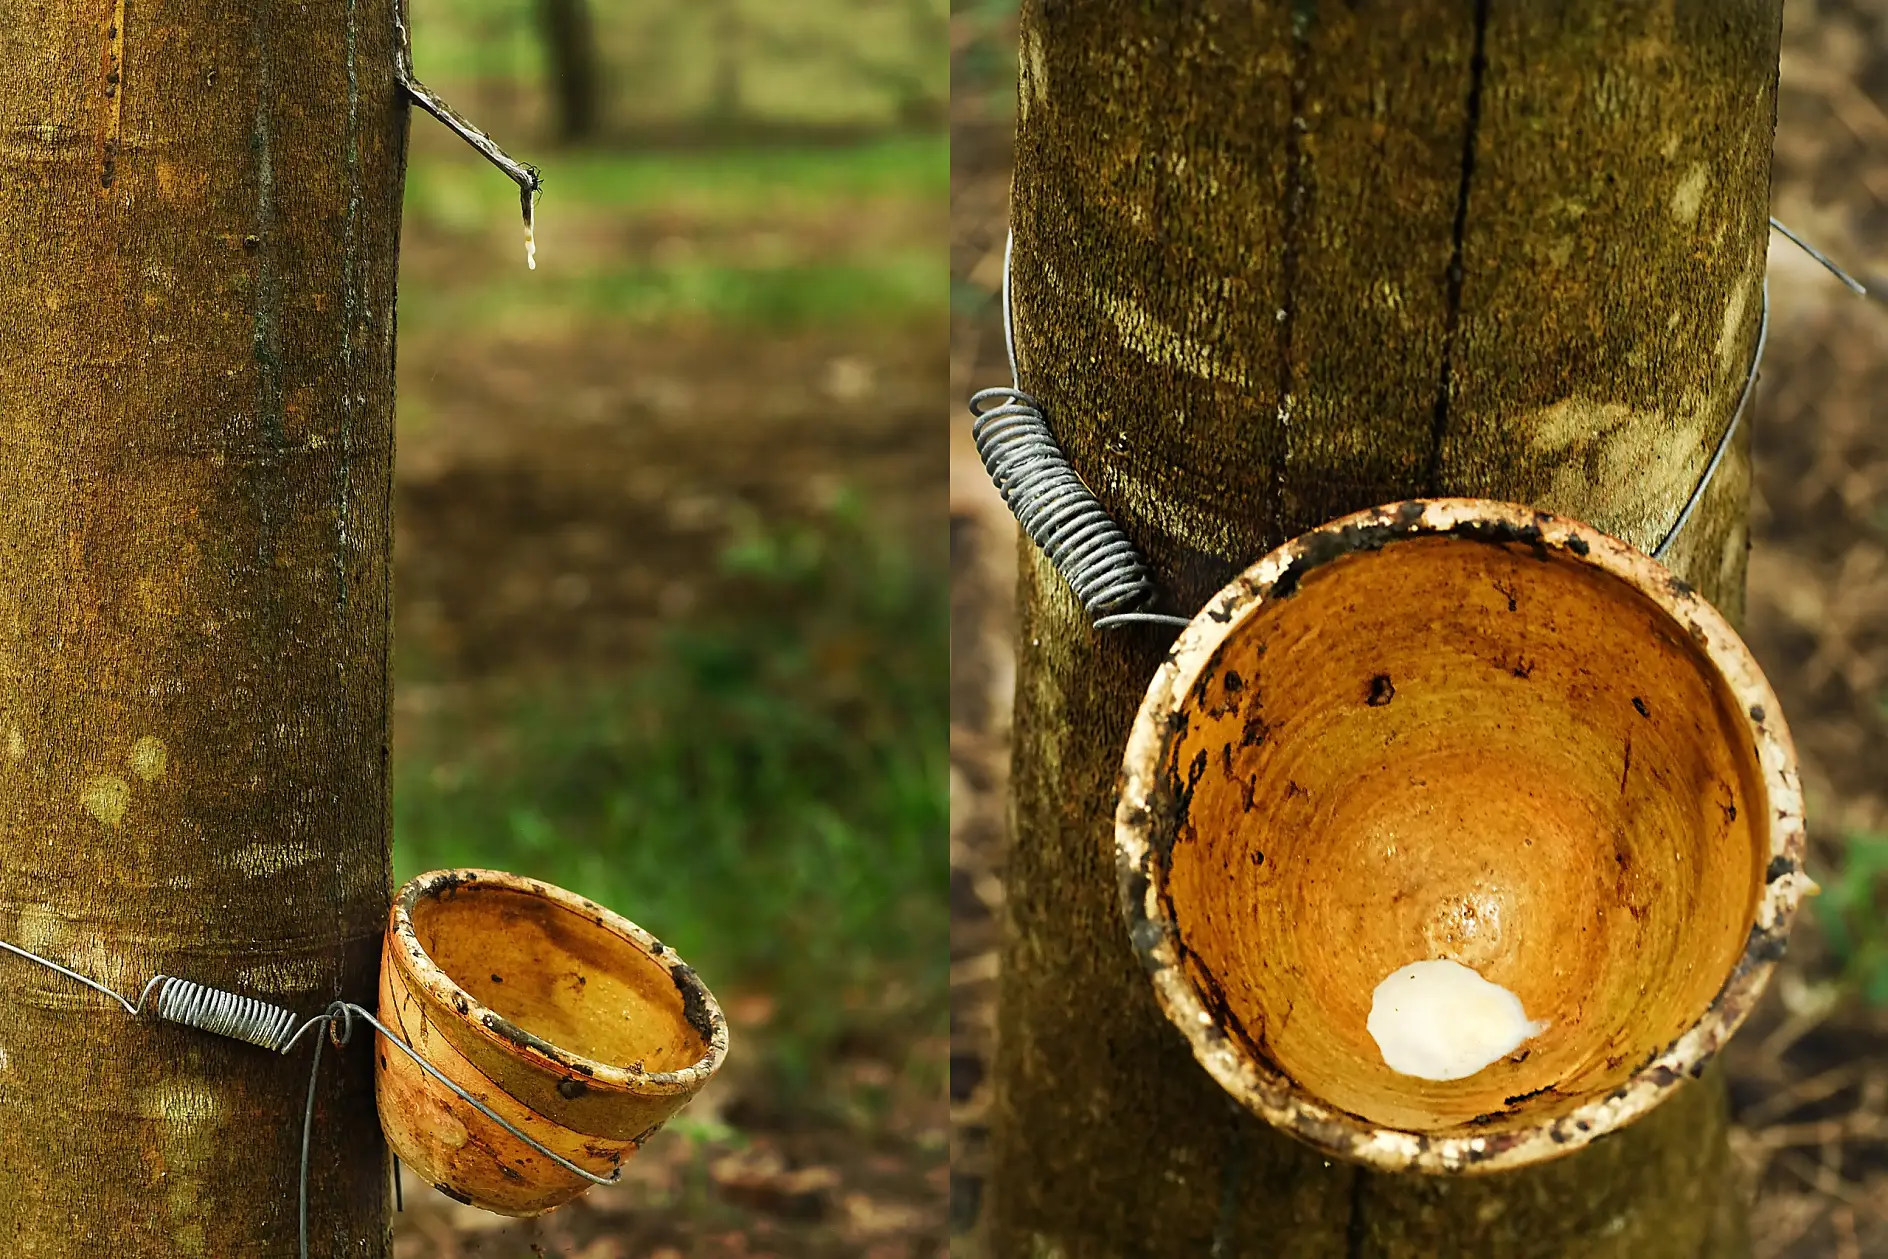 Latex milk is directly extracted from the rubber tree